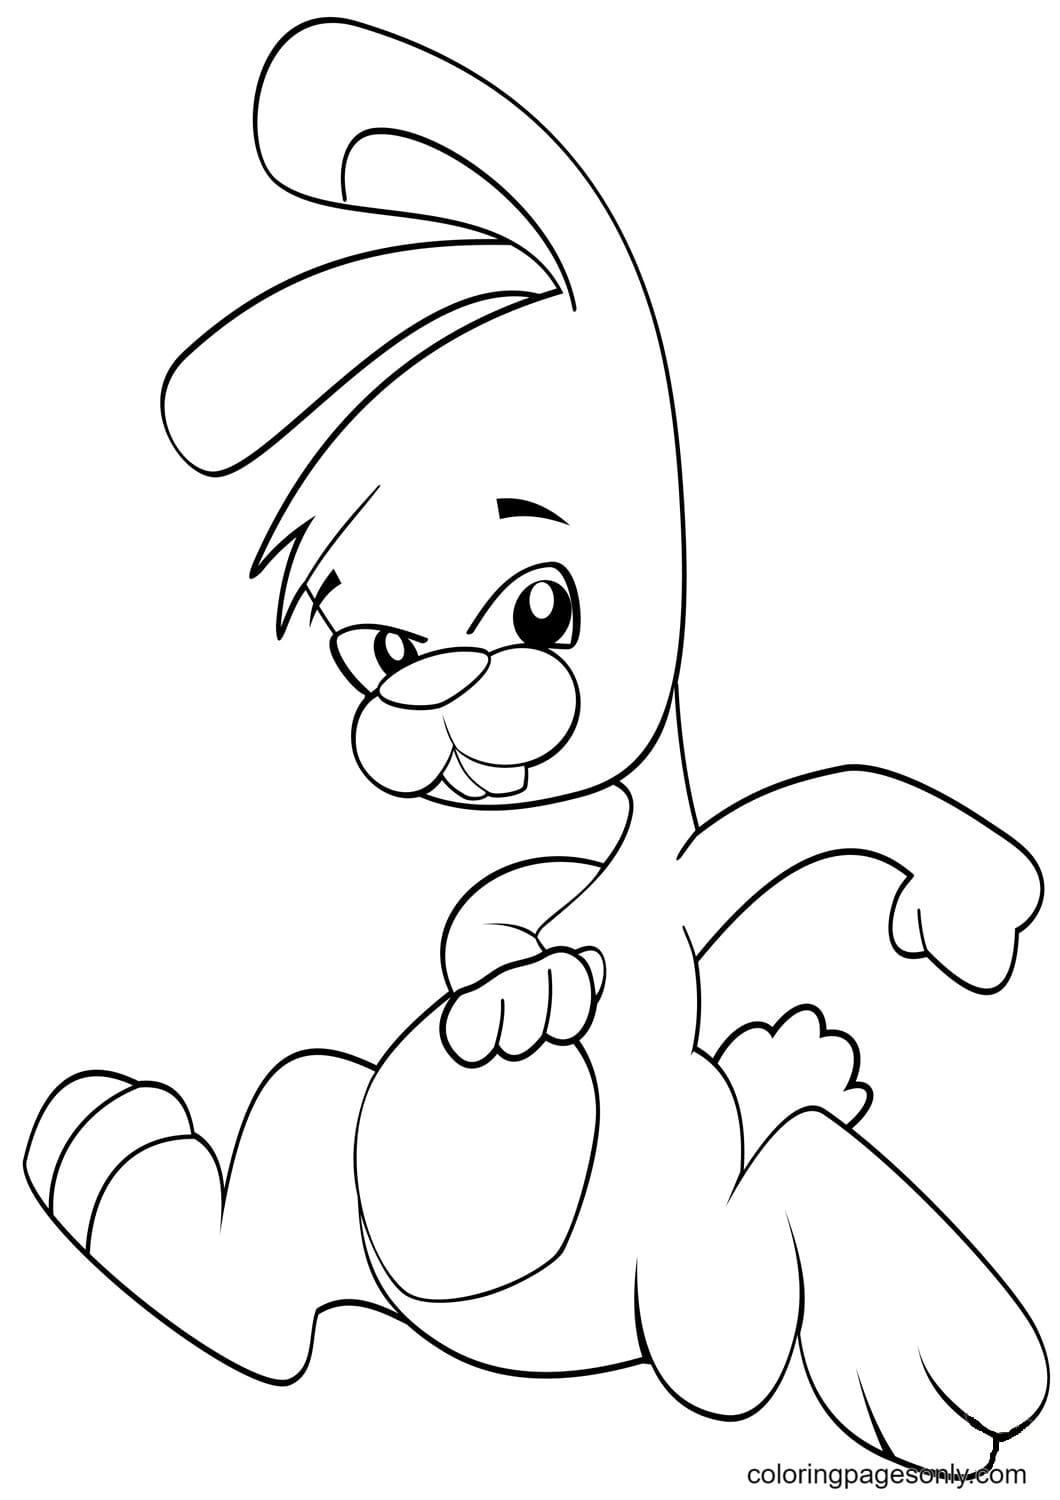 Running Bunnies Coloring Page